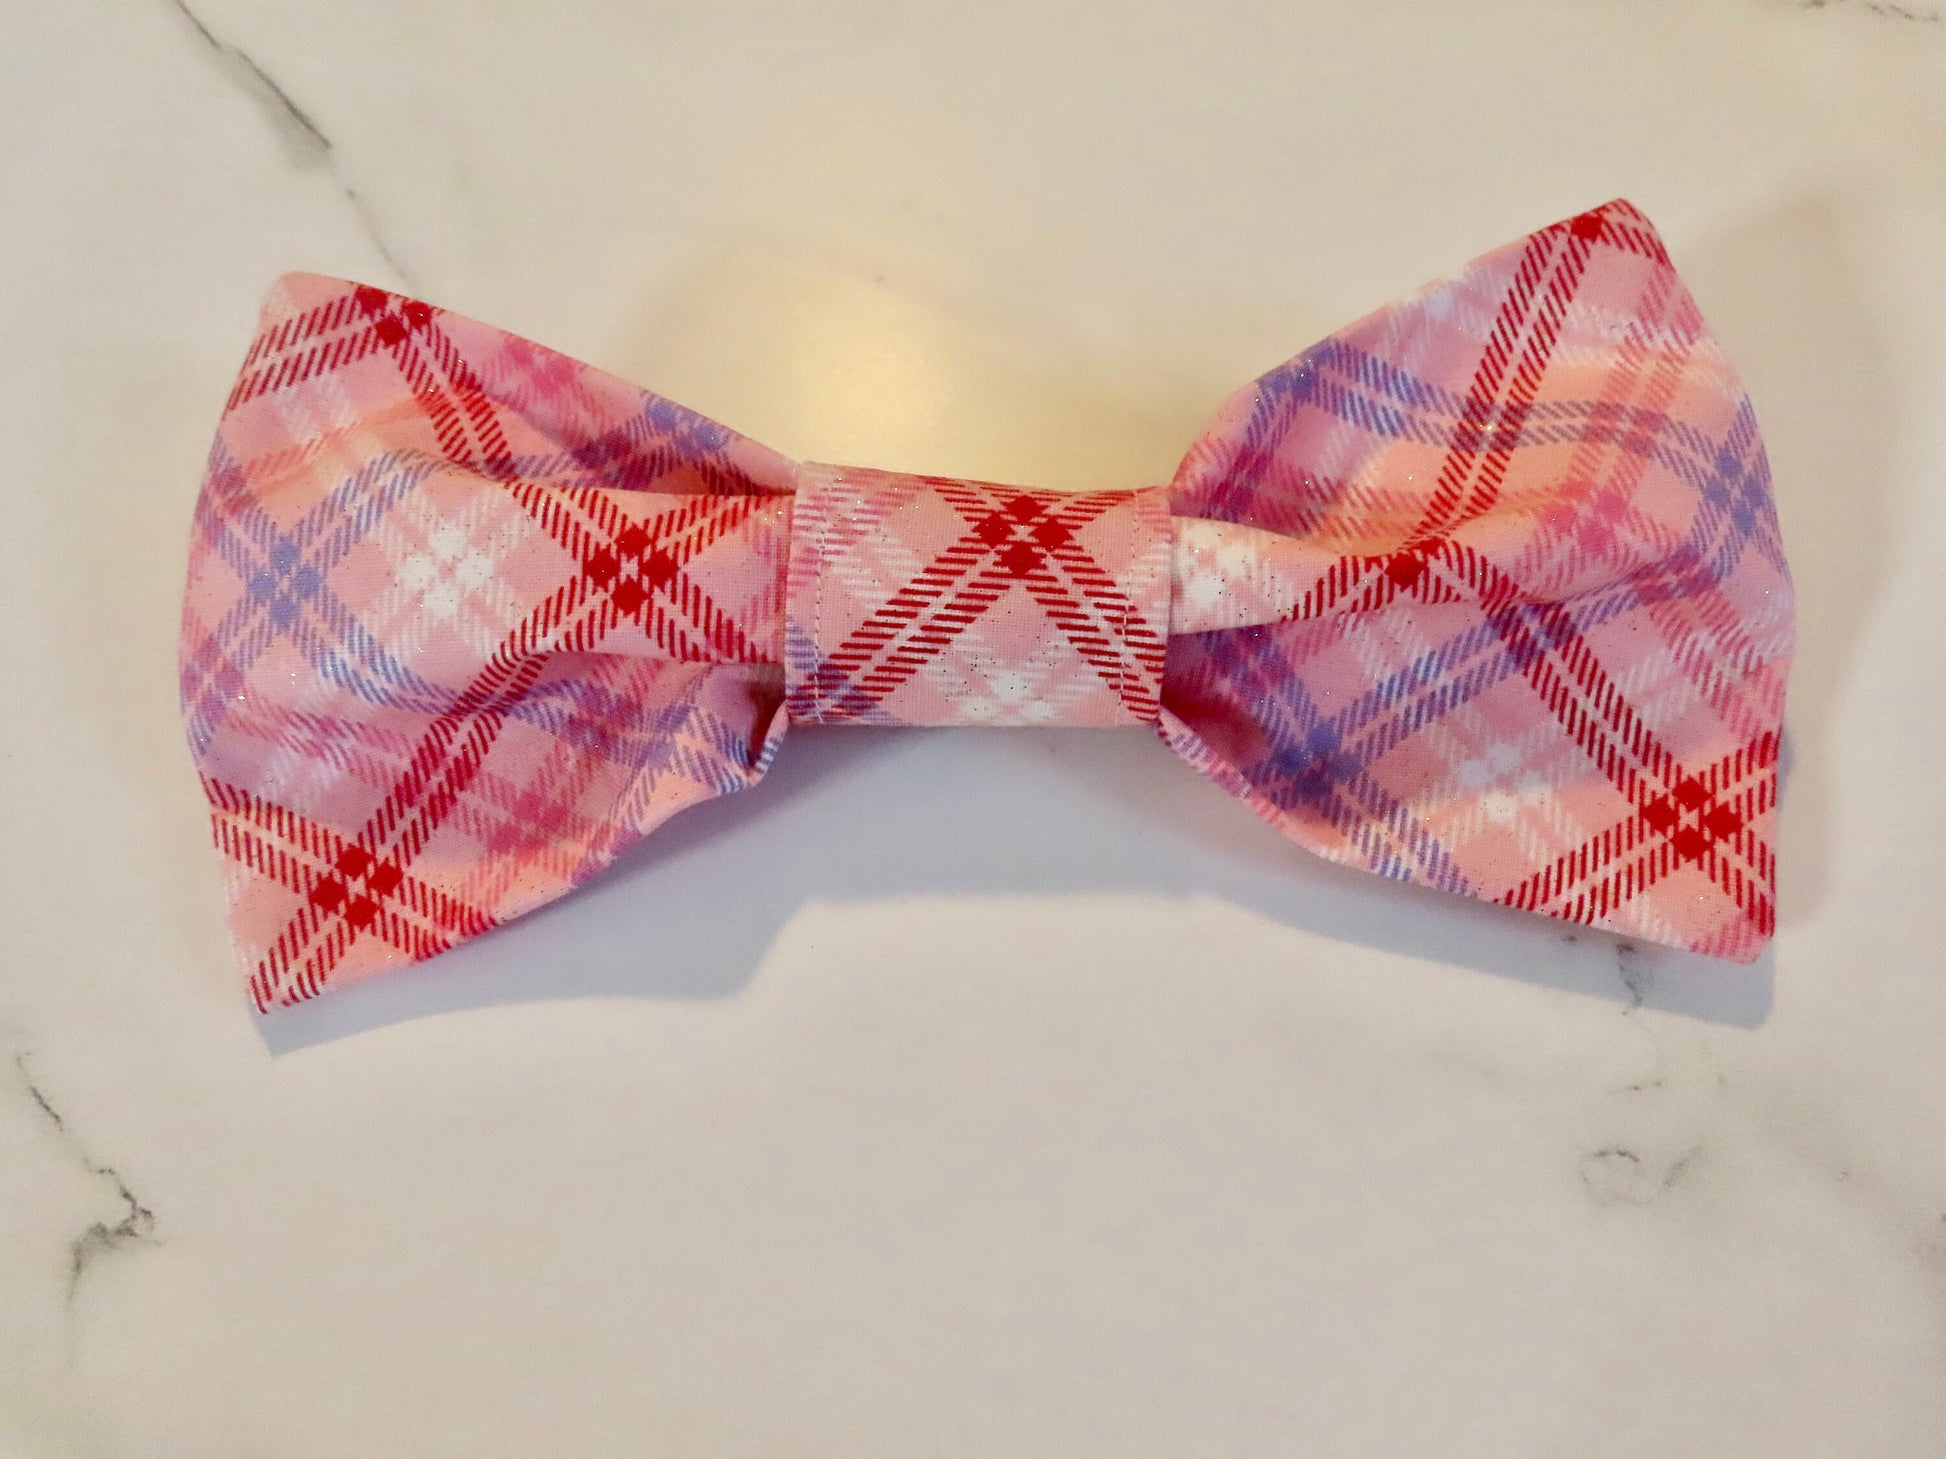 Over the Collar Dog Bow Tie-Valentines Plaid-Standard Bow-Sailor Bow-Valentine’s Day Dog Bow Tie-Valentines Dog Style-Valentine’s Dog Gift